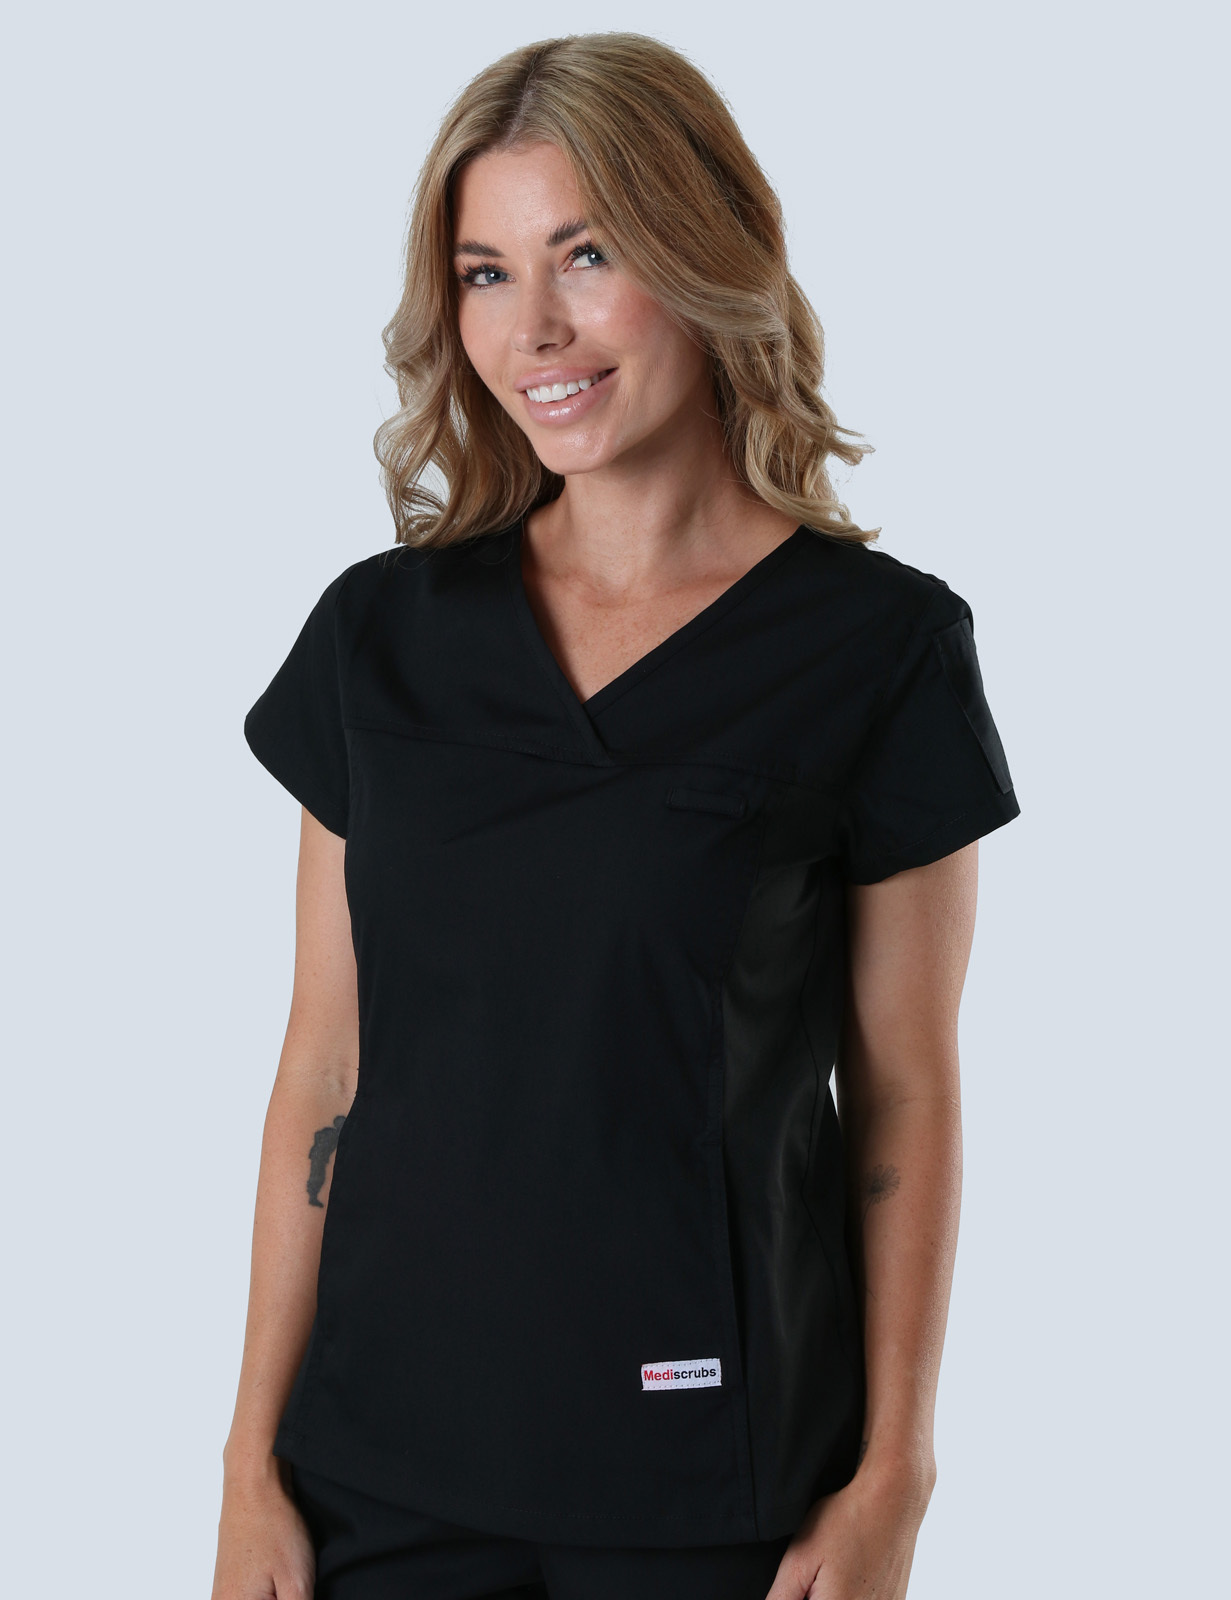 Logan Hospital - Medical Imaging Assistant (Women's Fit Spandex Scrub Top and Cargo Pants in Black incl Logos)